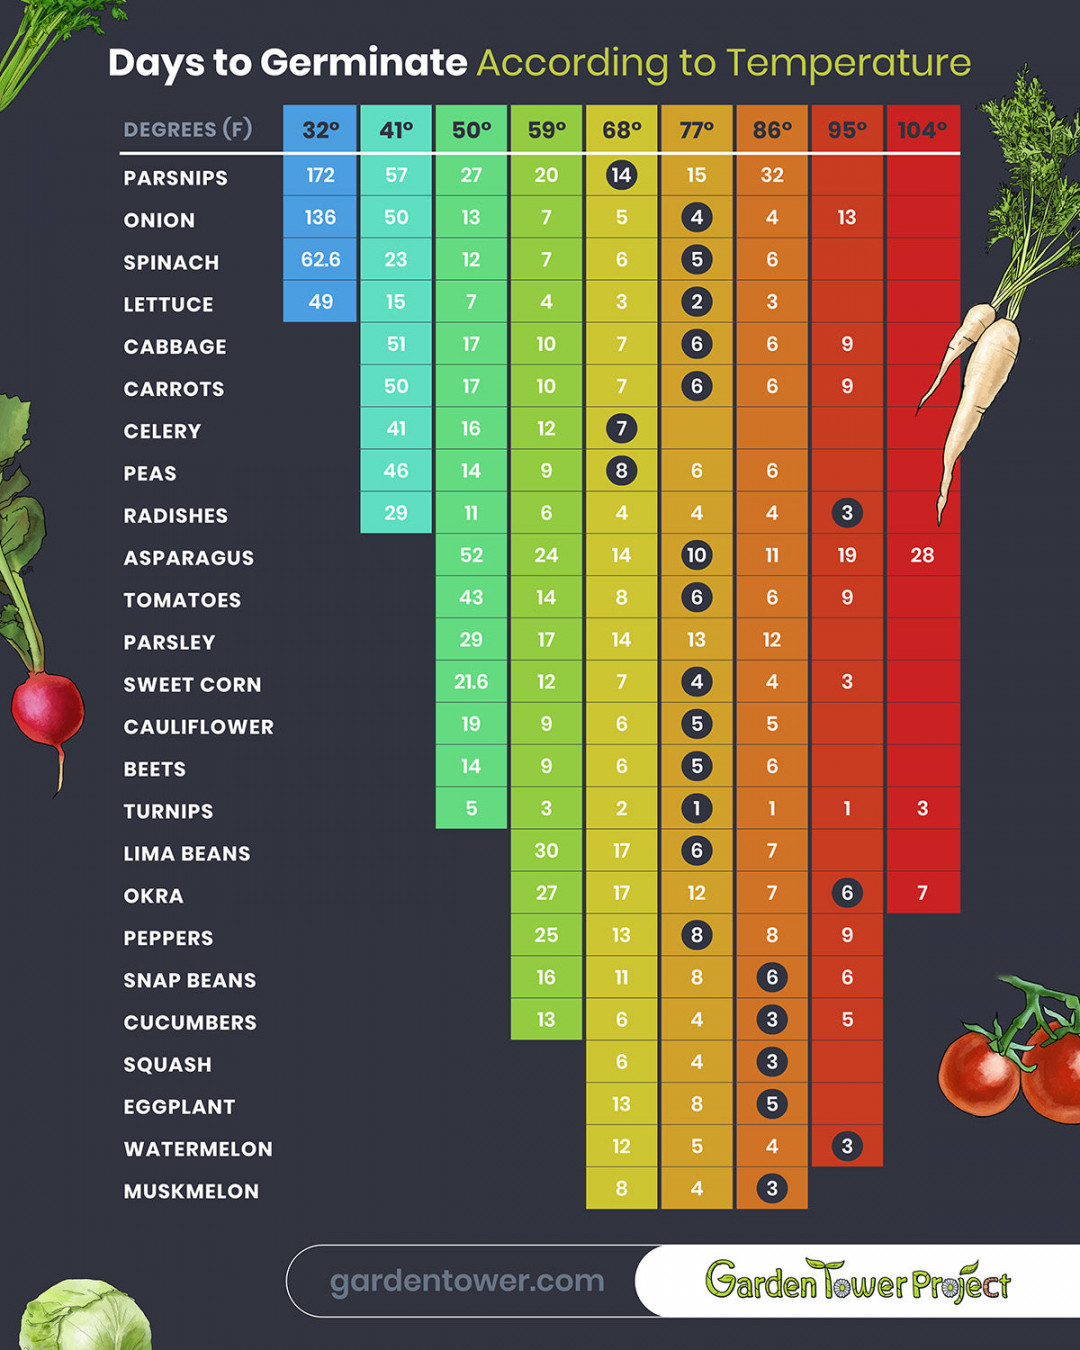 Vegetable Planting Schedule, Hardiness Zone Look-up, & Germination